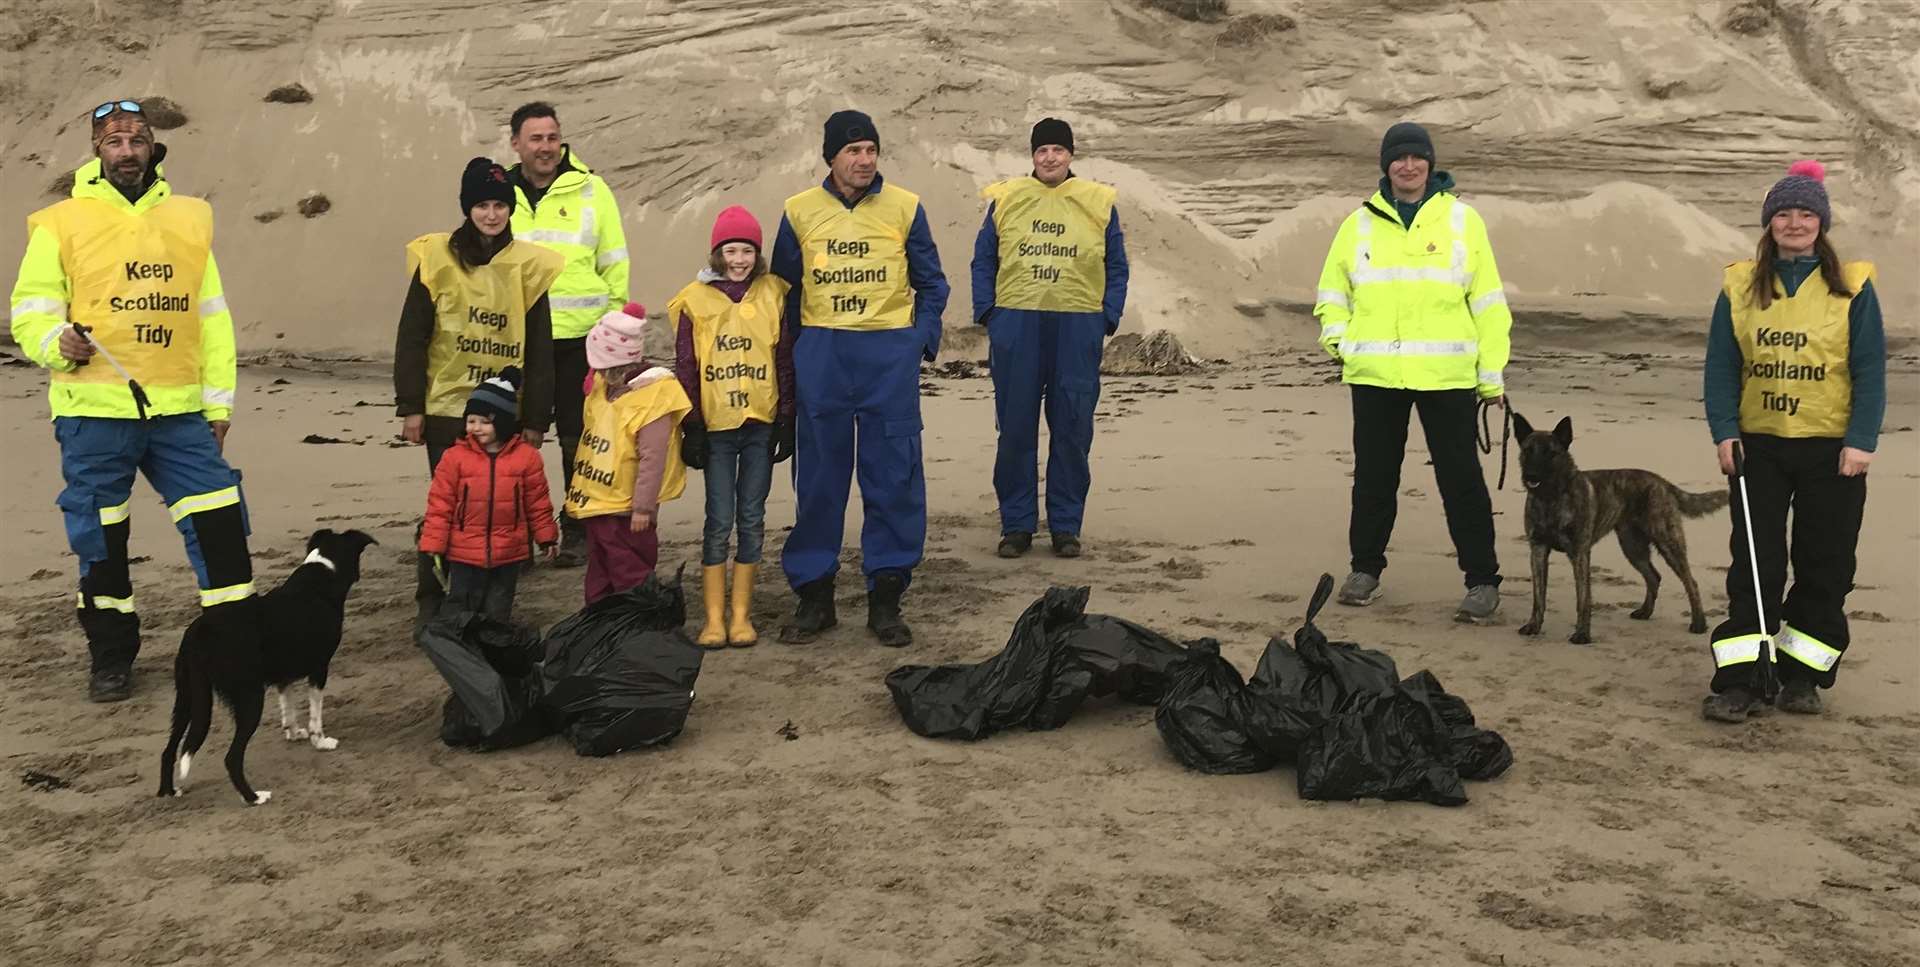 Seven bags of rubbish were collected during the beach clean.